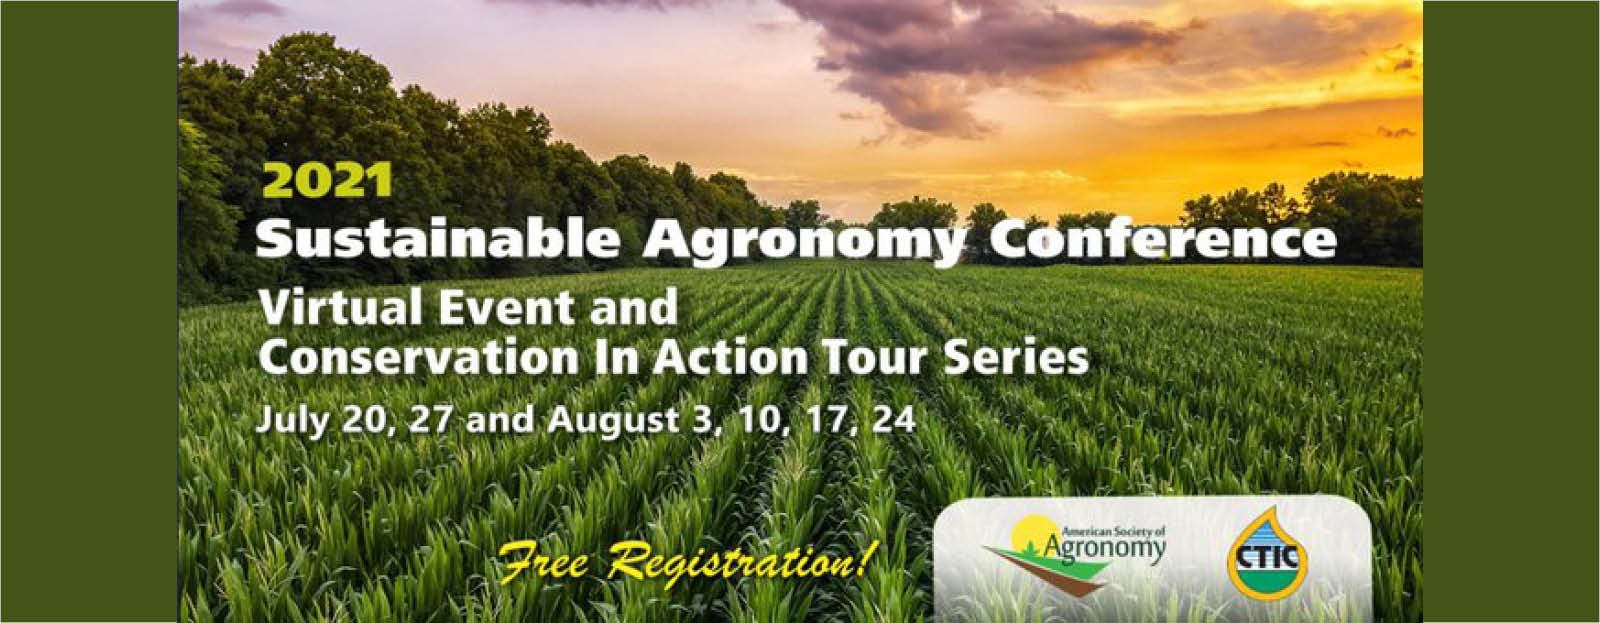 Banner for Virtual ASA Sustainable Agronomy Conference 